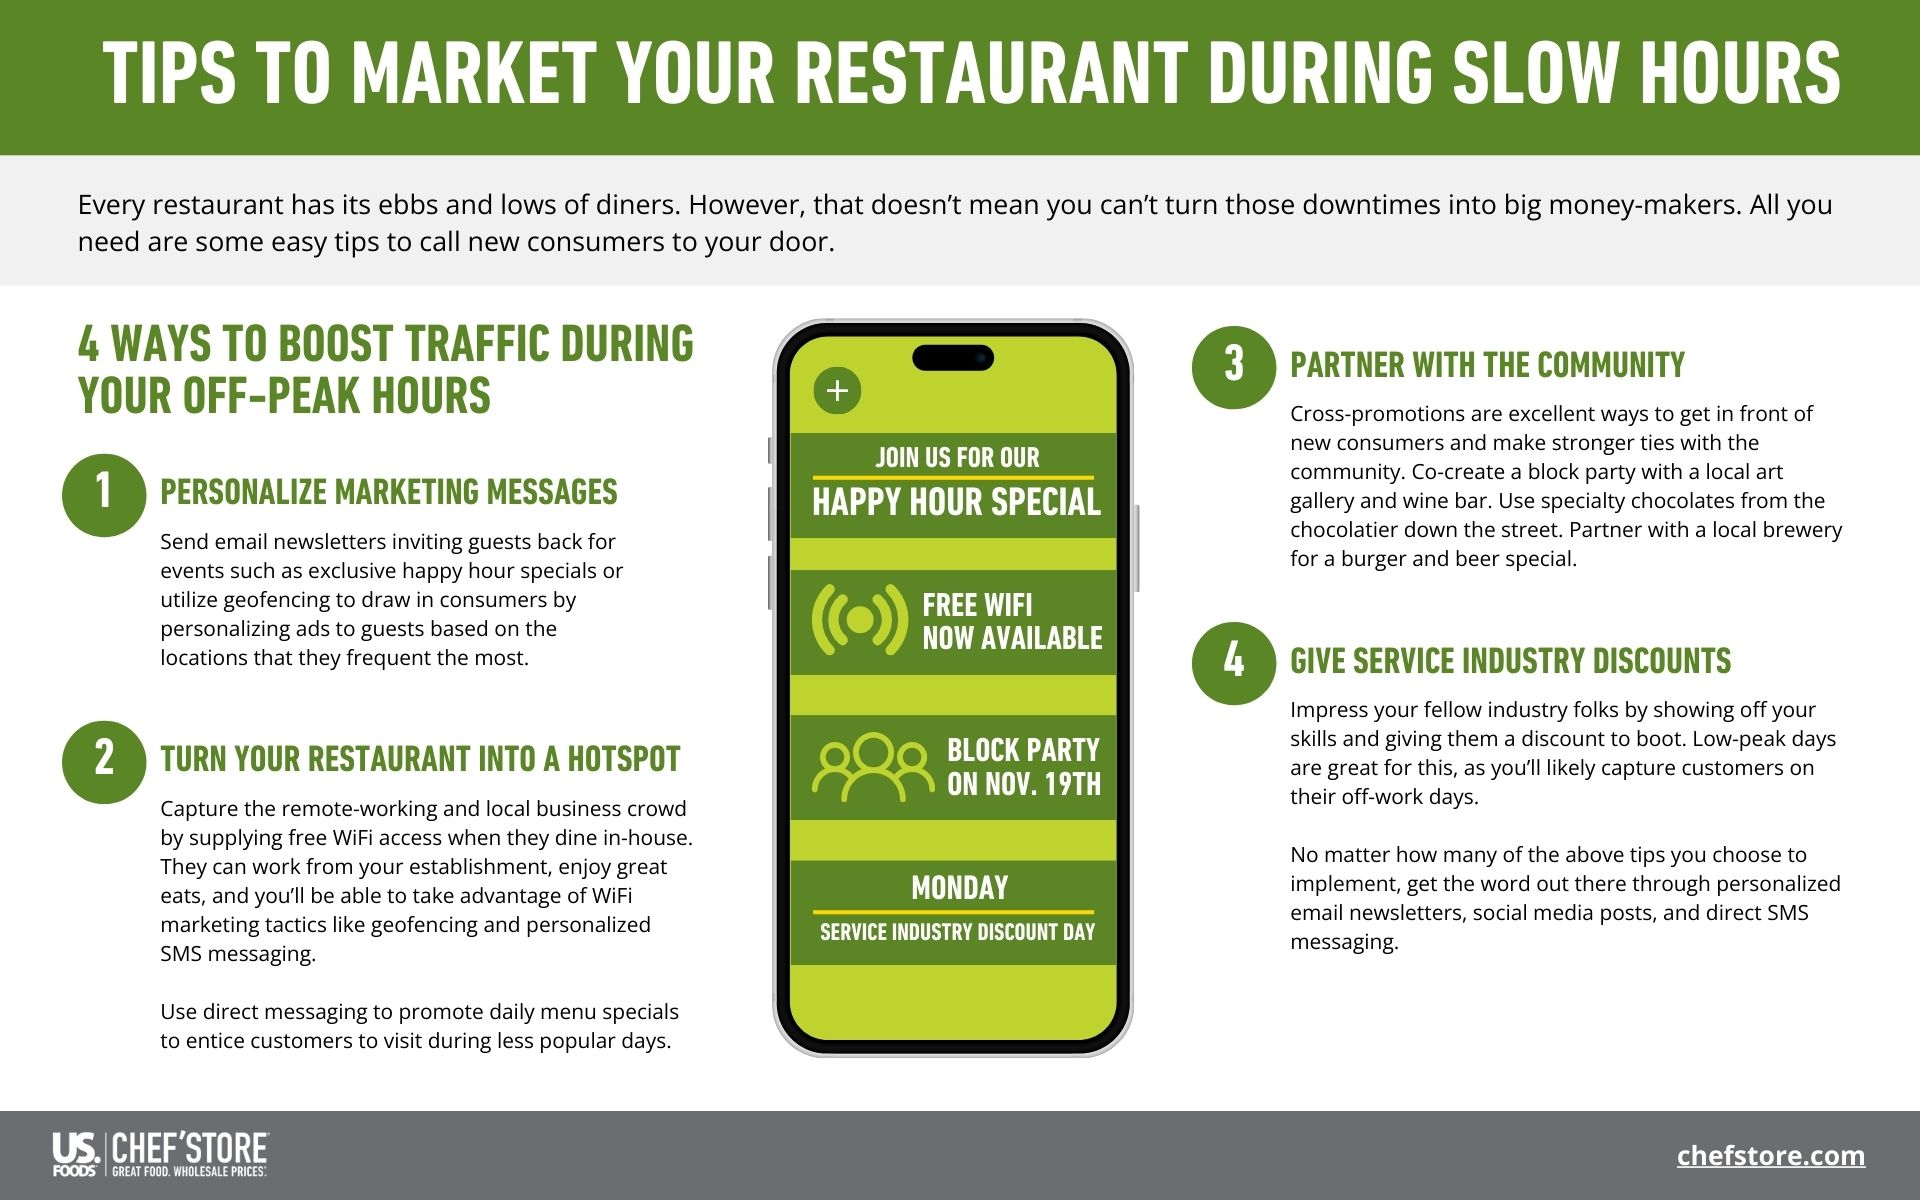 Tips to market your restaurant during slow hours.